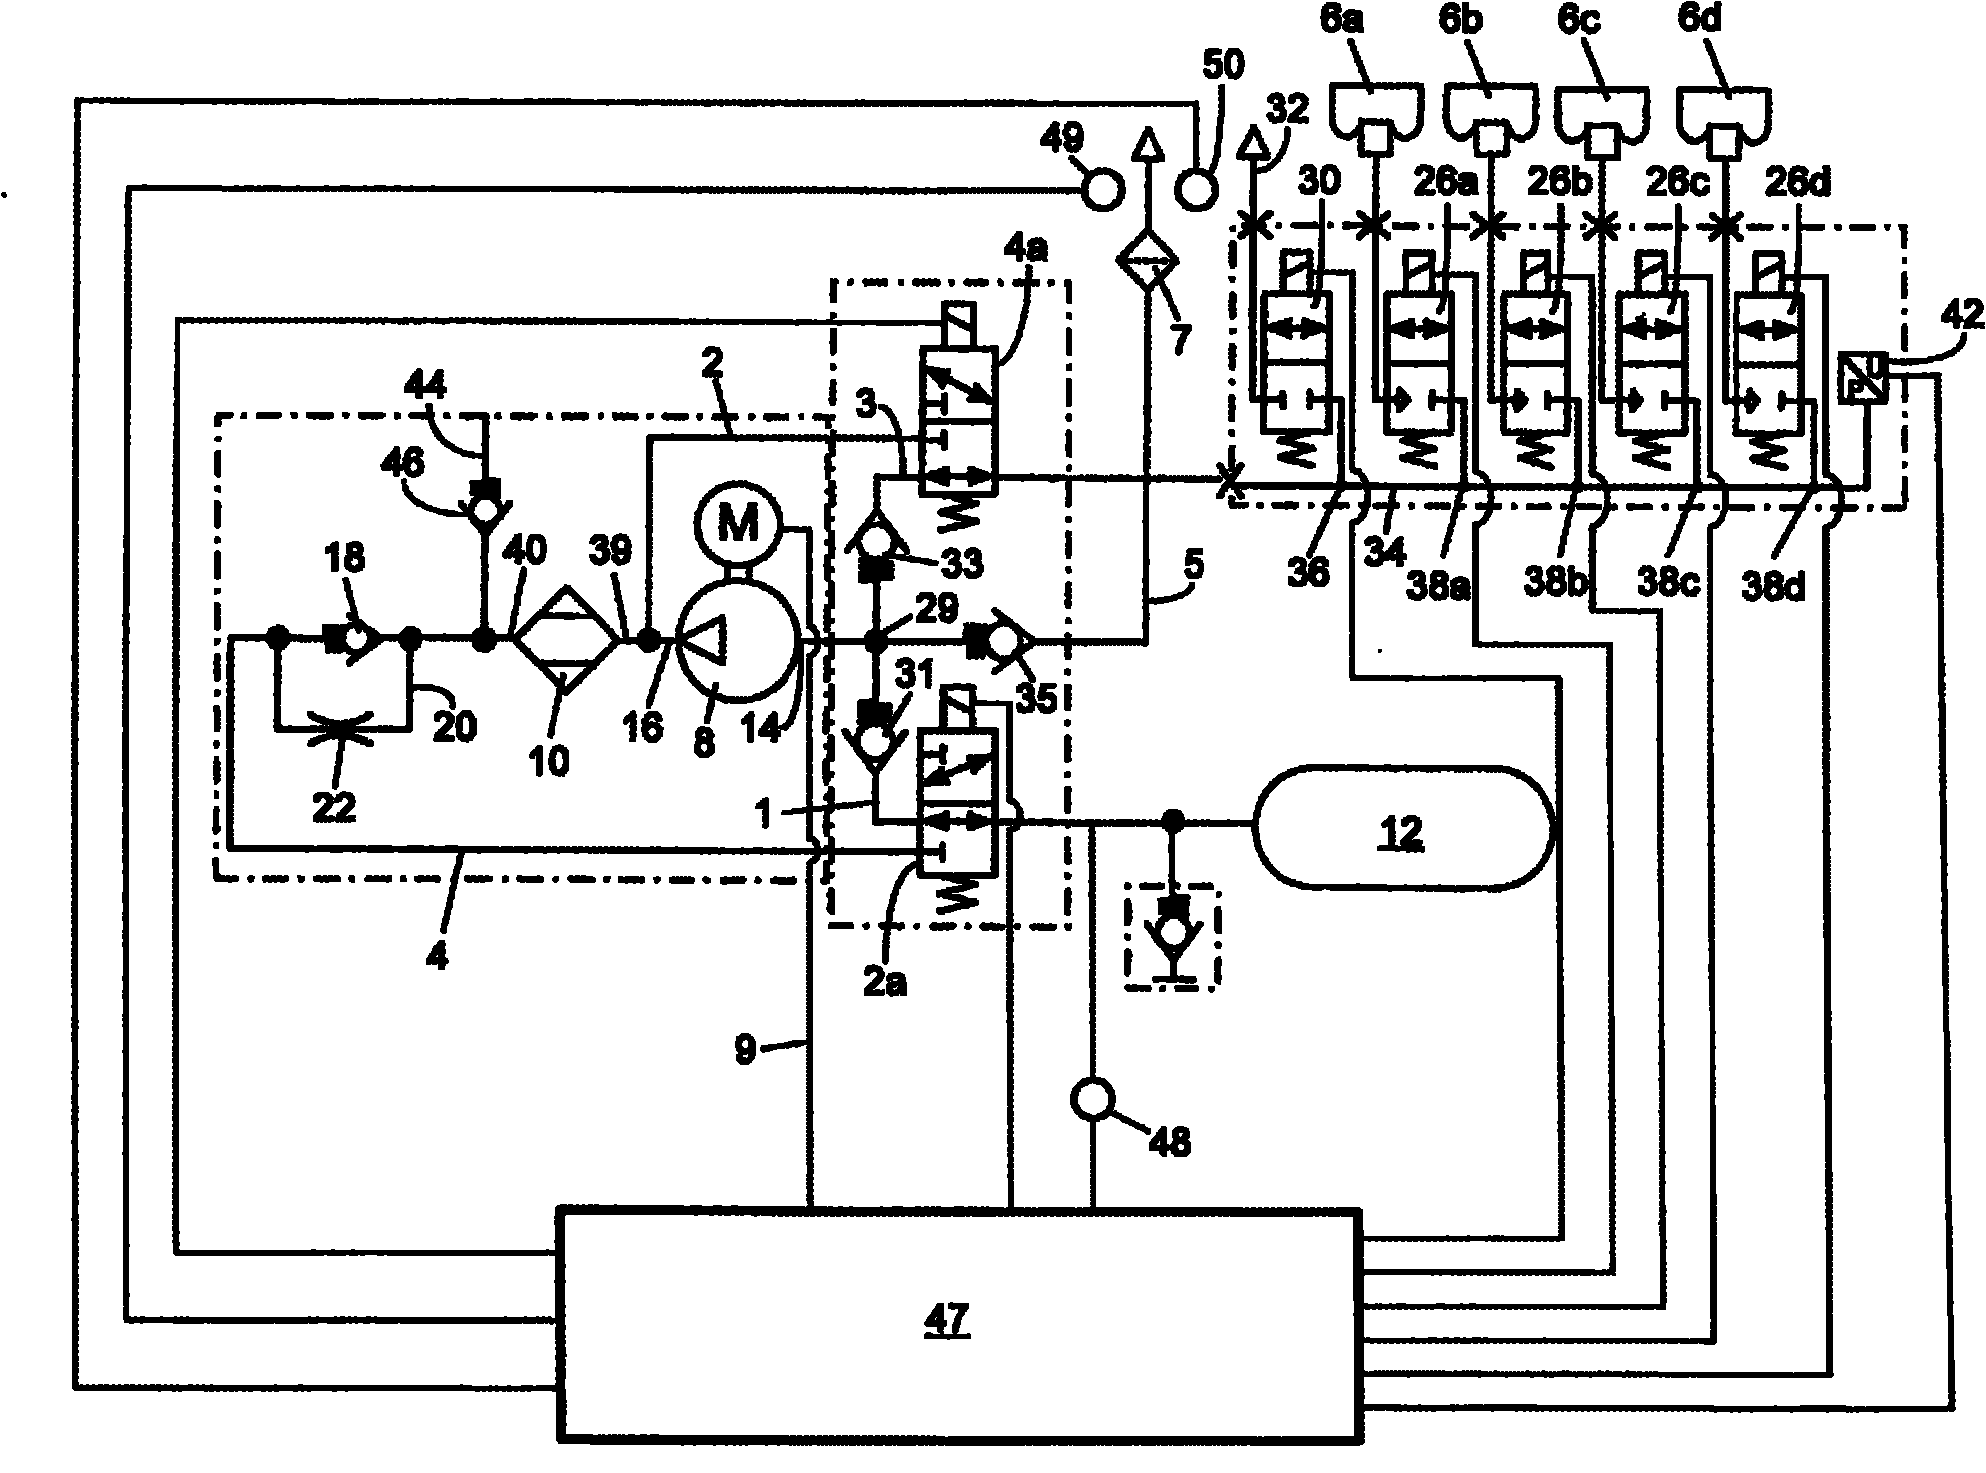 Method for controlling the regeneration cycles for an air dryer in a closed ride control system for vehicles